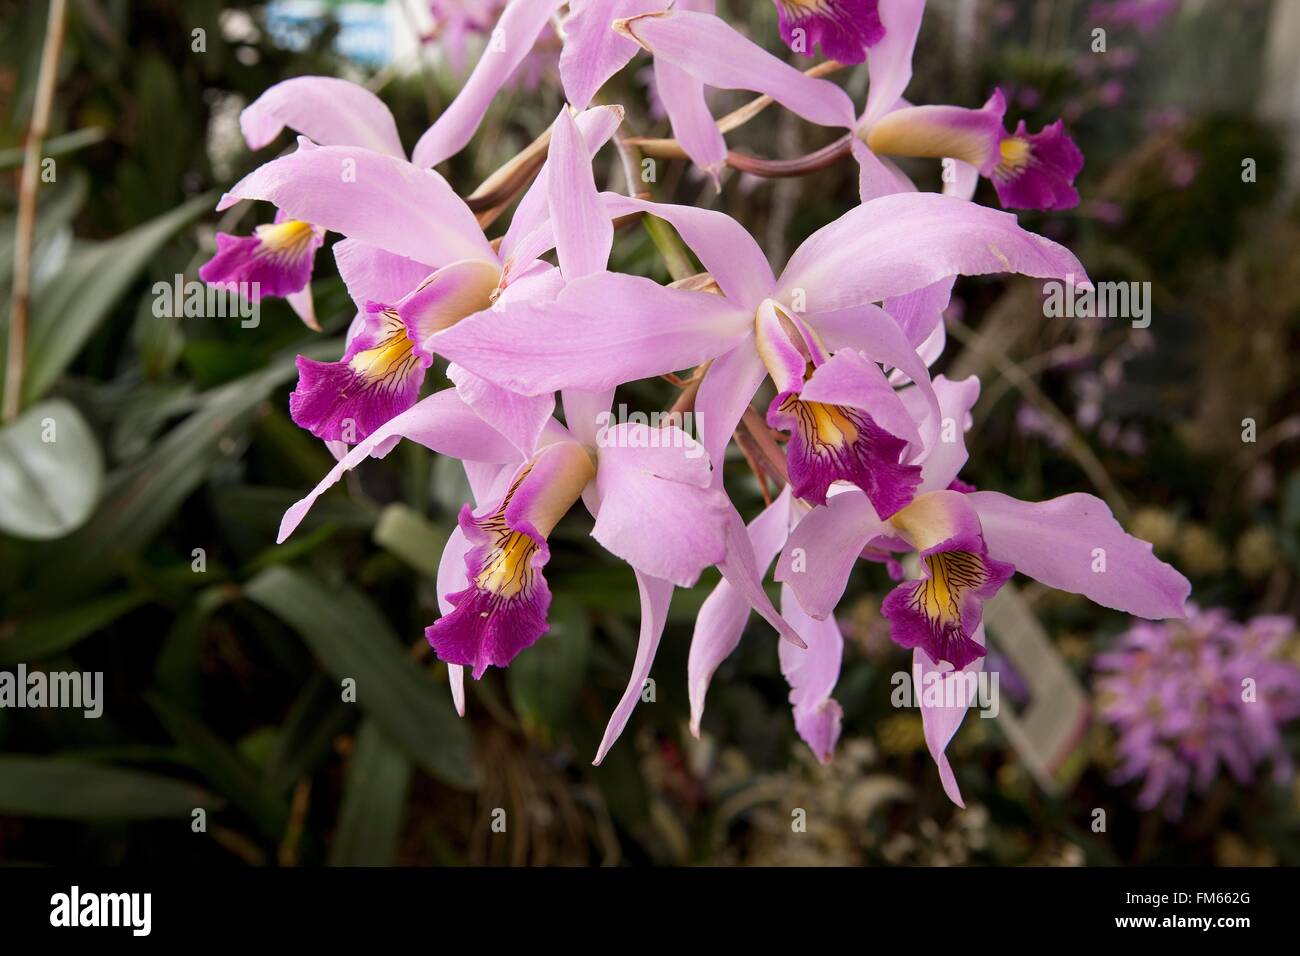 Laelia  anceps is a small genus of the orchid family, growing in the Glasshouse at RHS Wisley. Stock Photo